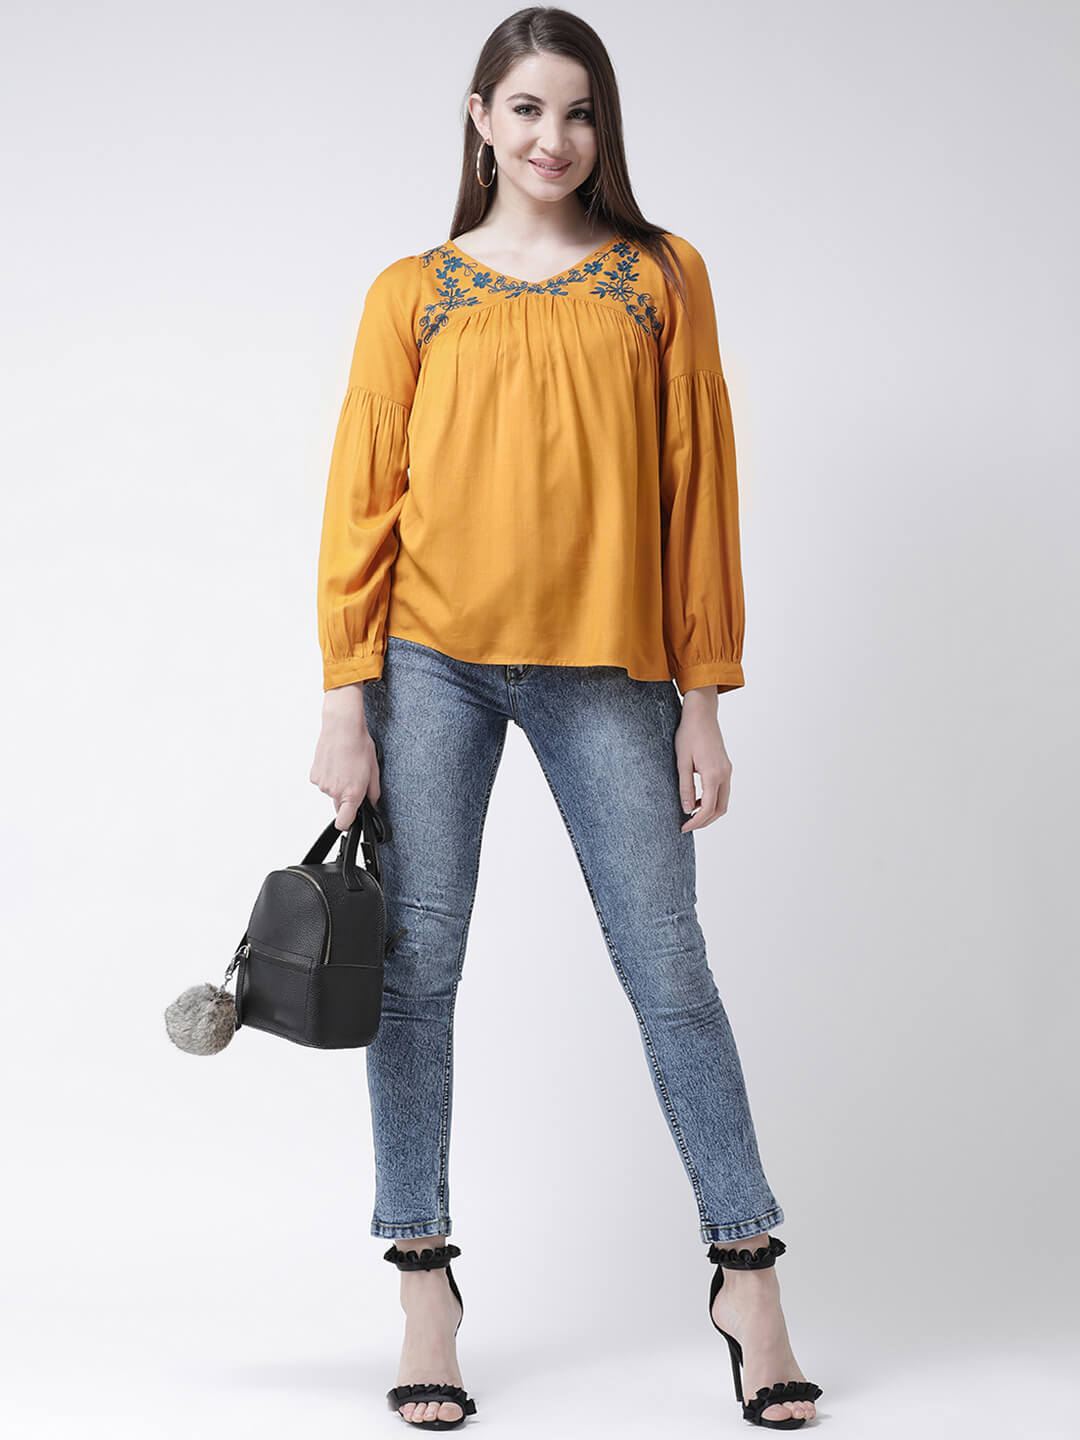 Women'S Mustard Top With Embroidery On Neck